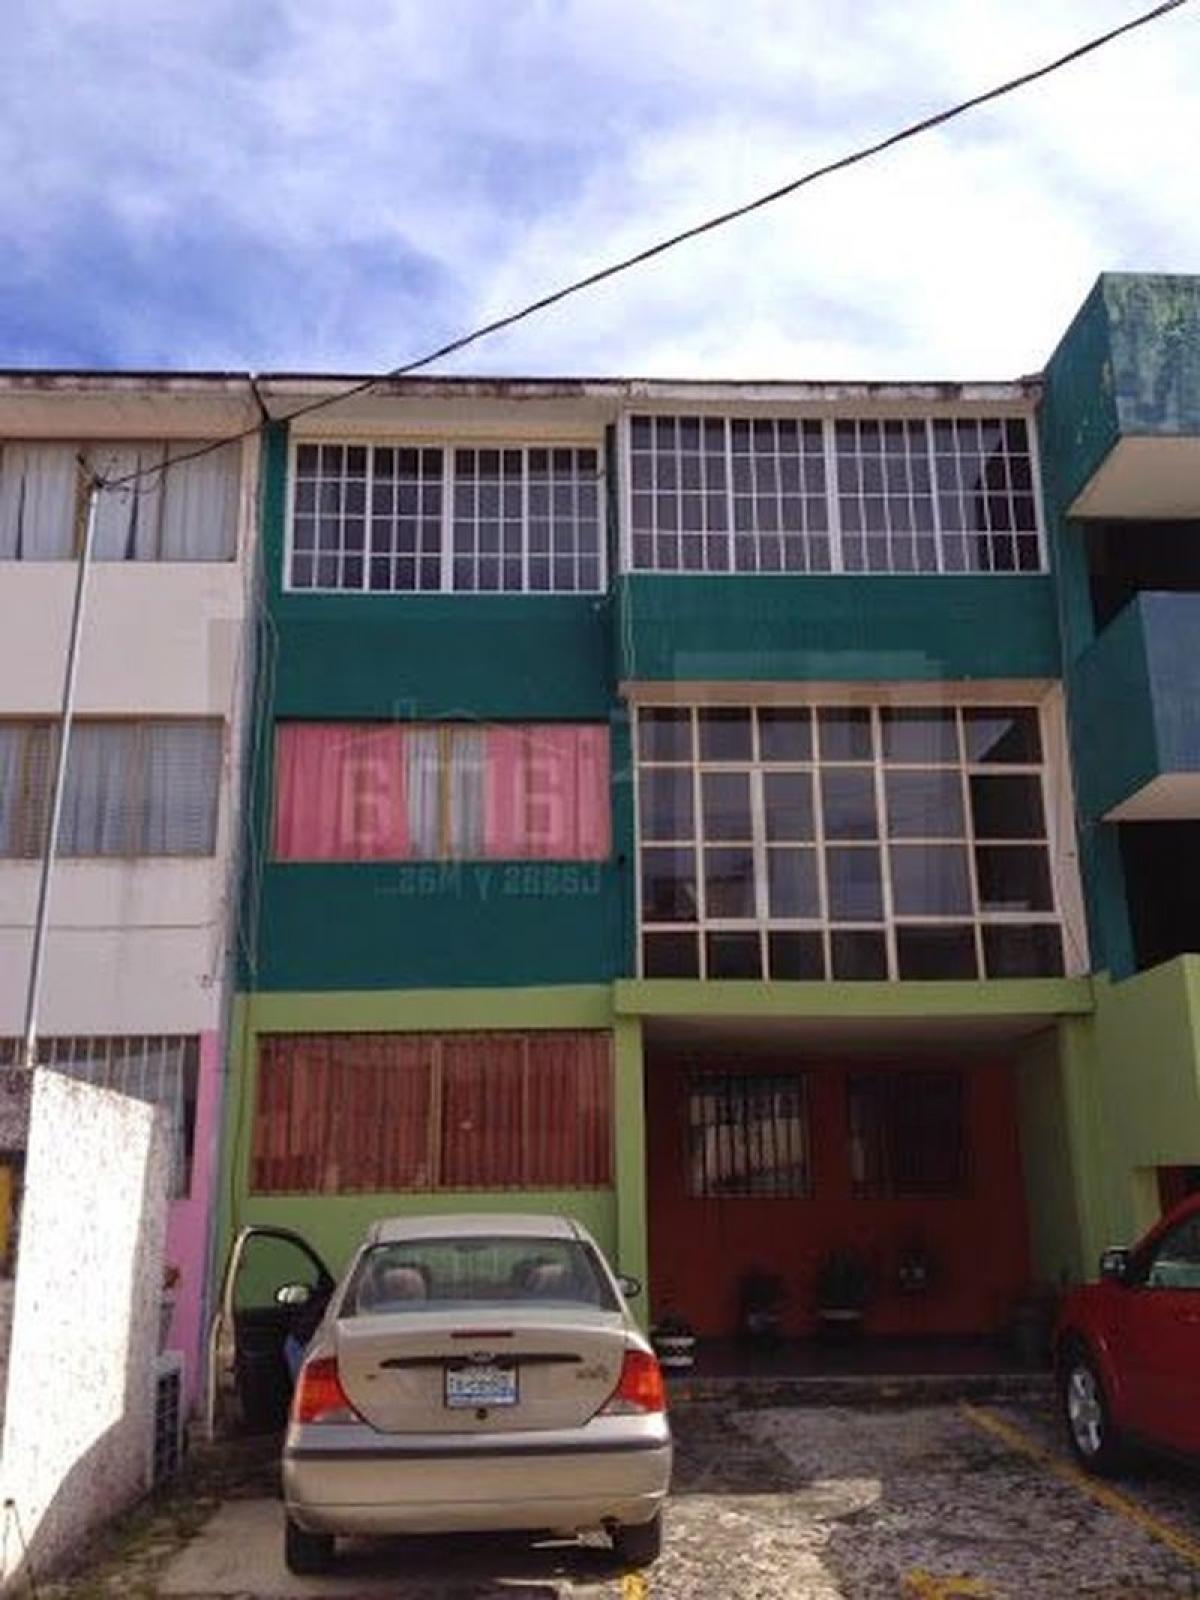 Picture of Apartment For Sale in Nayarit, Nayarit, Mexico